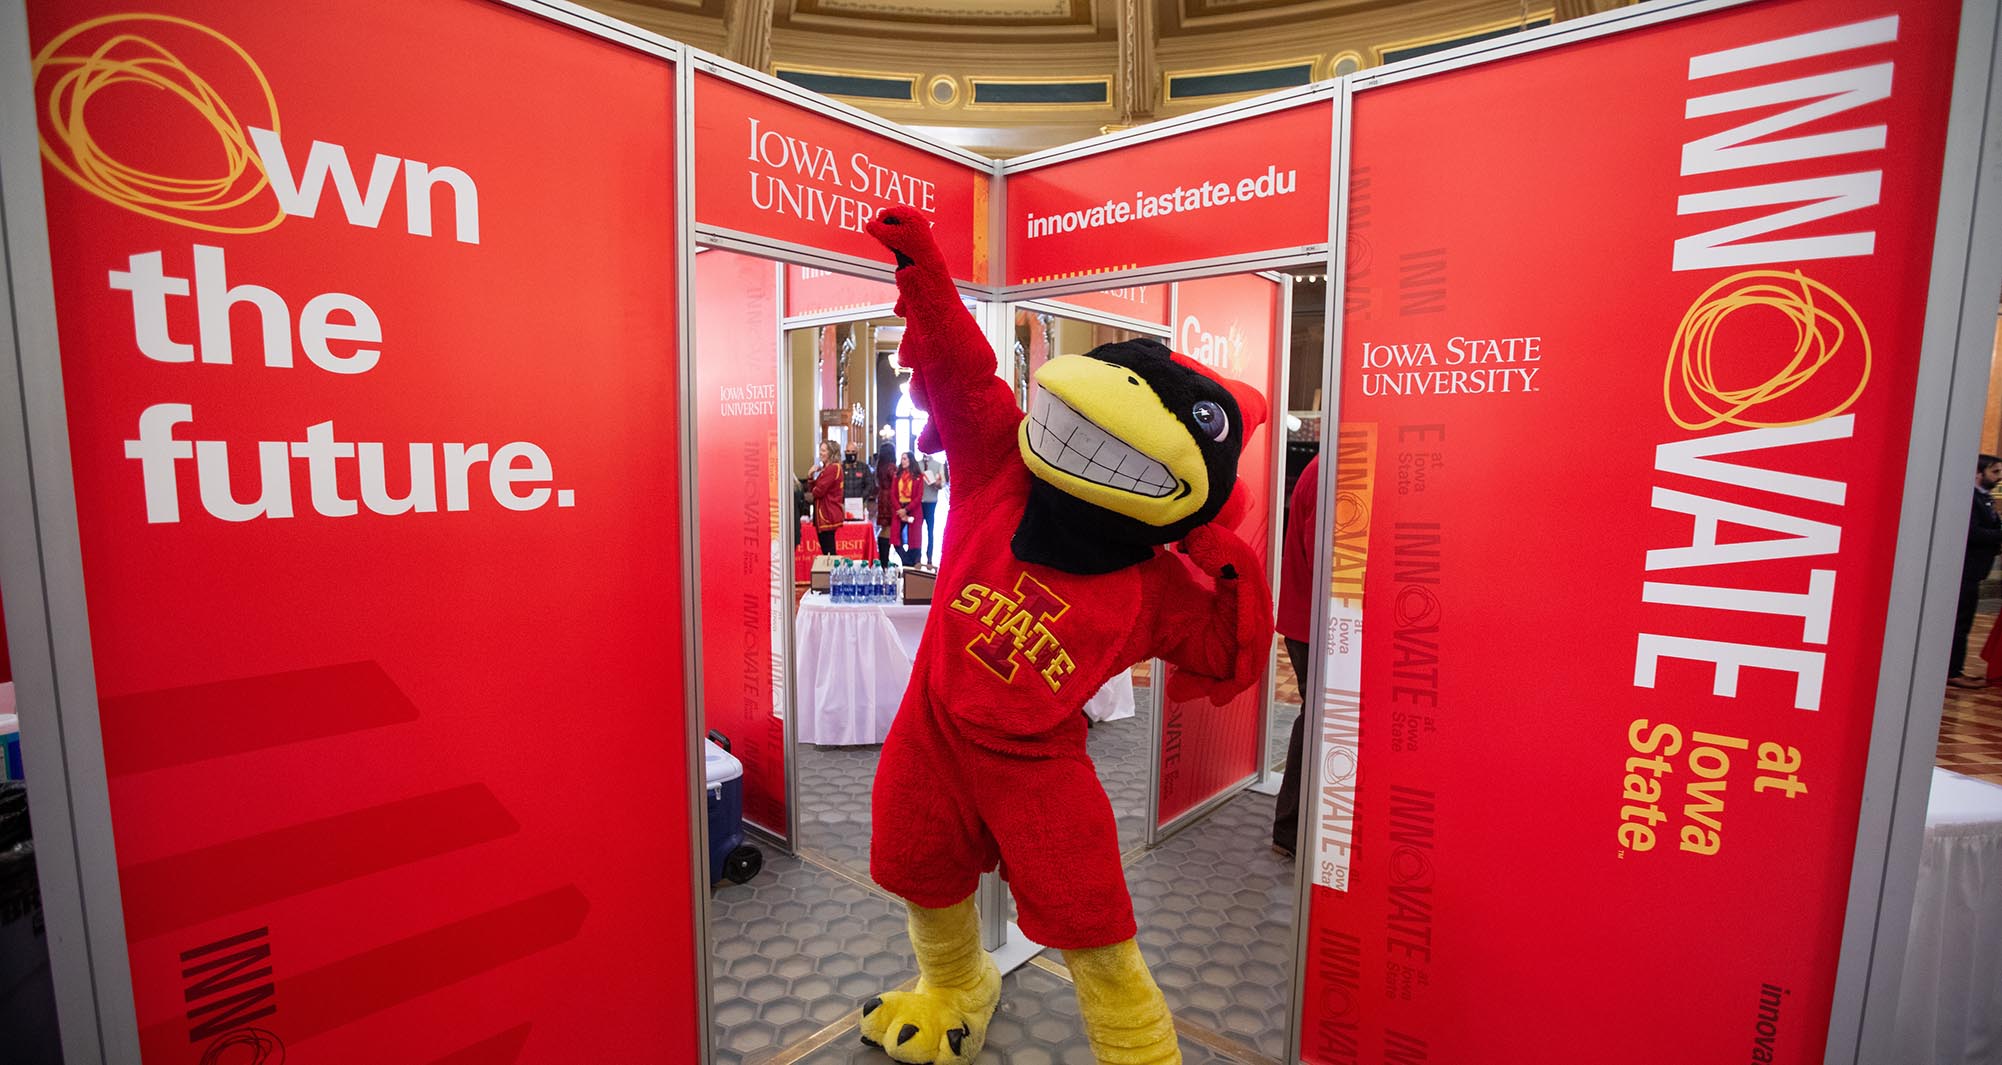 Cy the Mascot poses with the Innovation display during ISU's Day at the Capitol event.